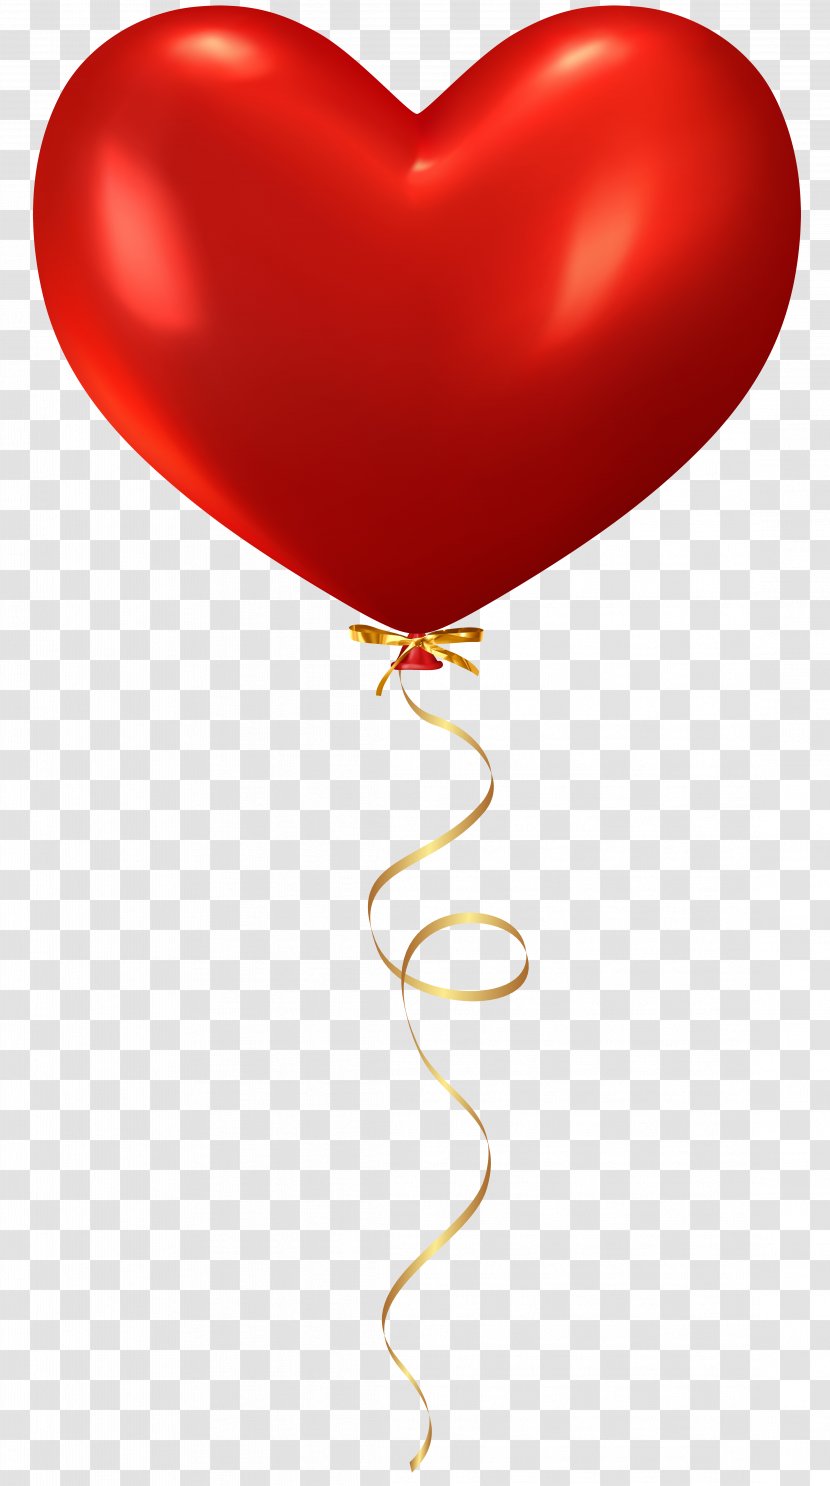 Red Balloons - Heart - Toy Party Supply Transparent PNG